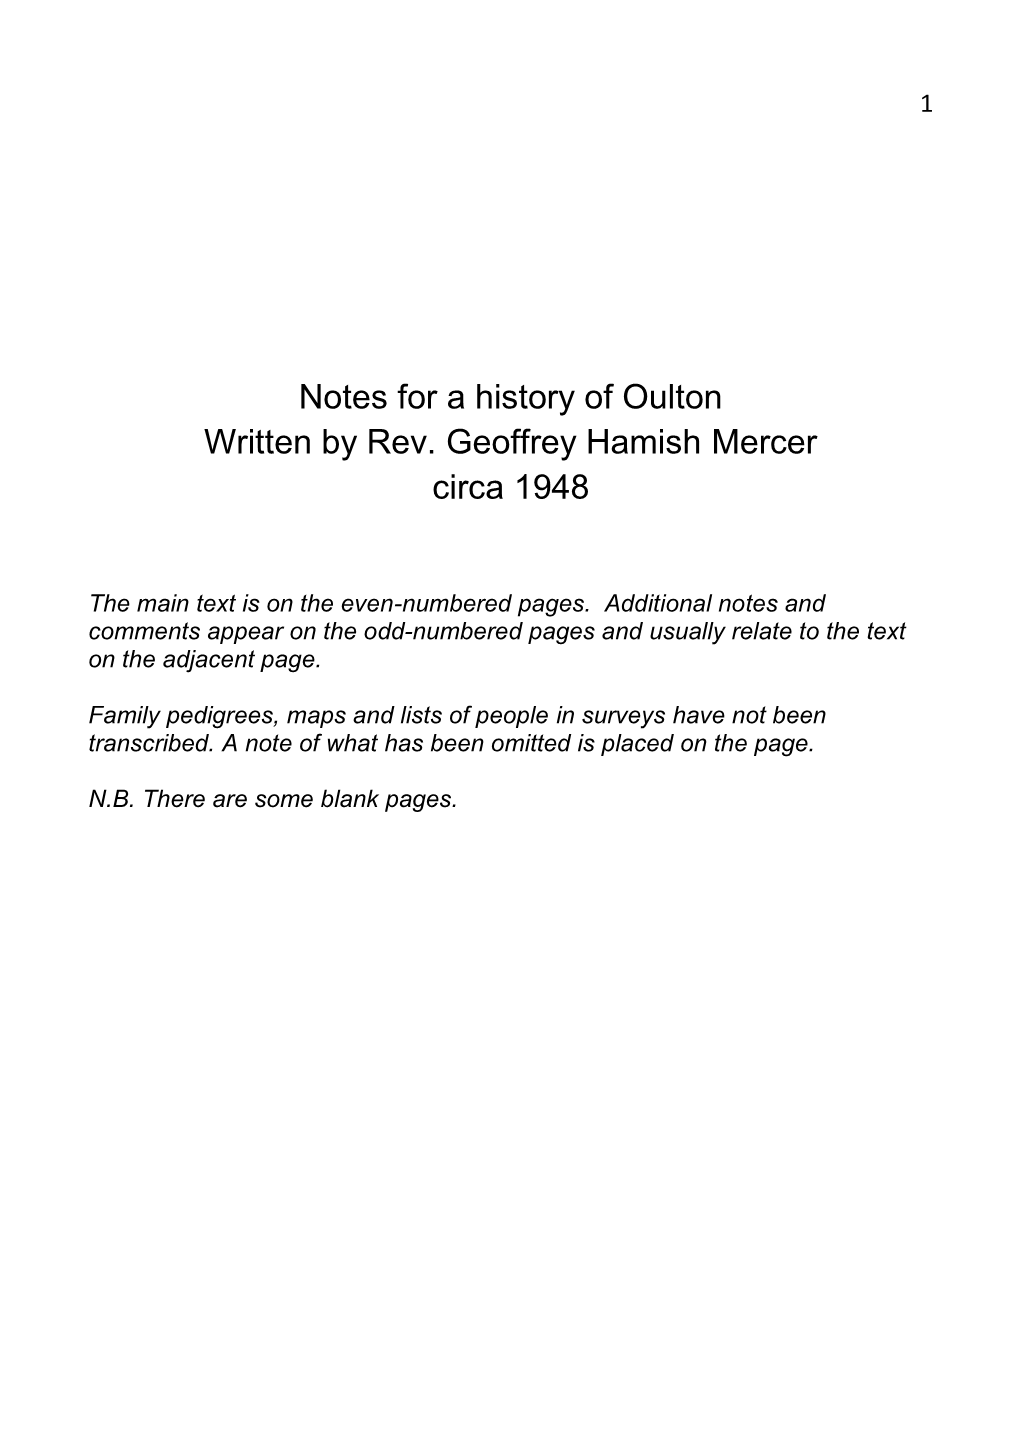 Notes for a History of Oulton Written by Rev. Geoffrey Hamish Mercer Circa 1948